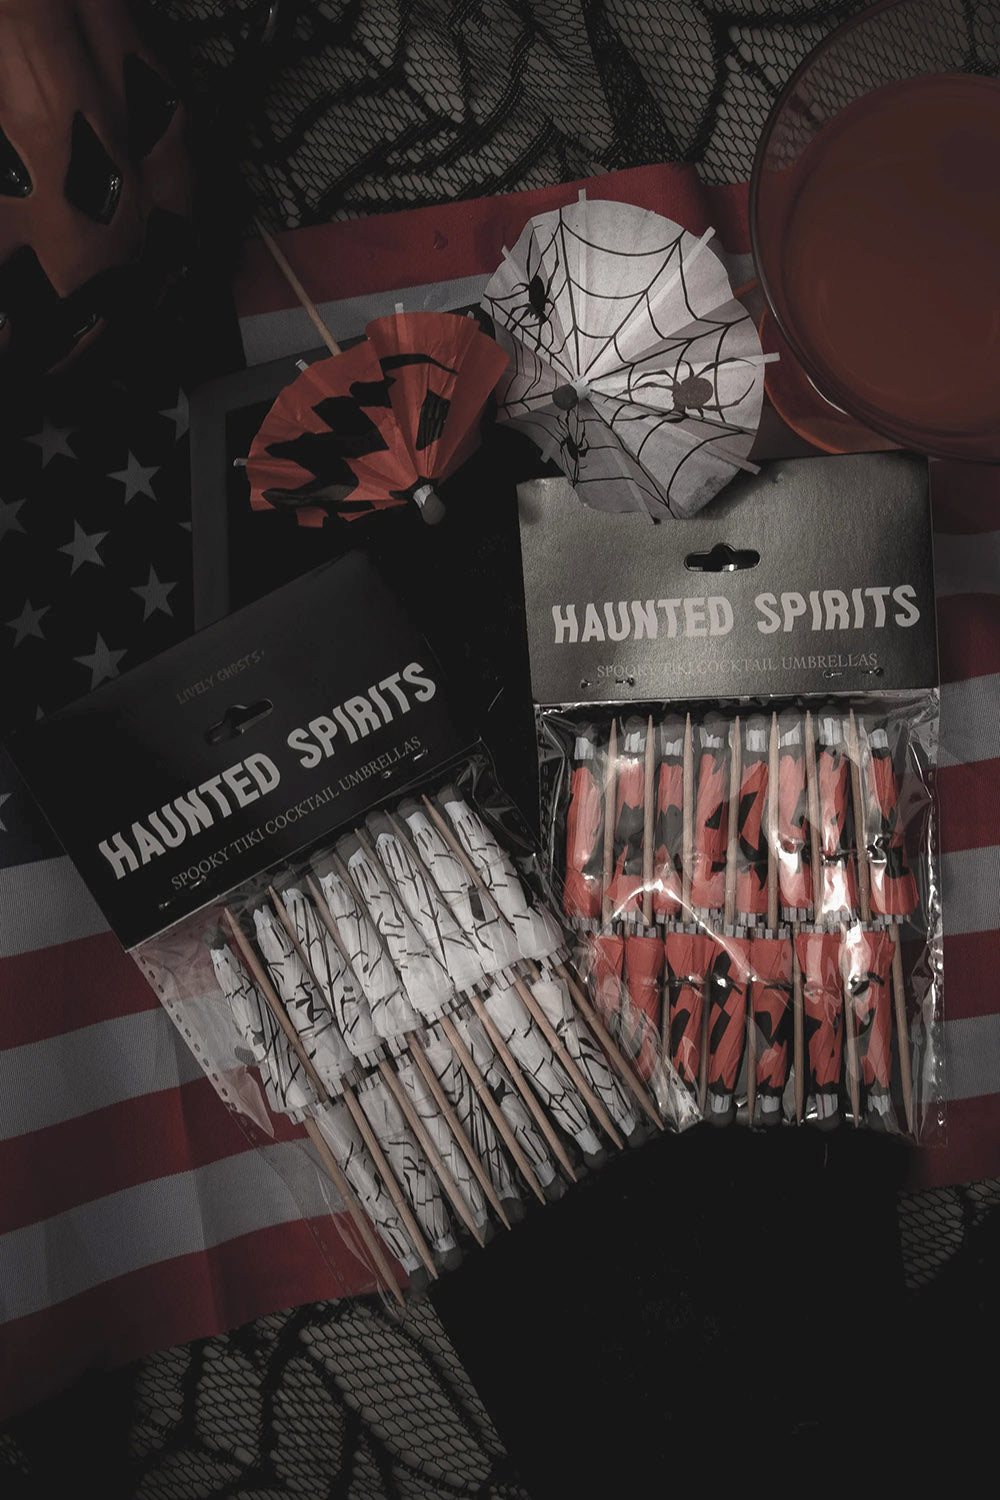 Haunted Spirits 'Spiders' | Spooky Cocktail Umbrellas [15 Pack]